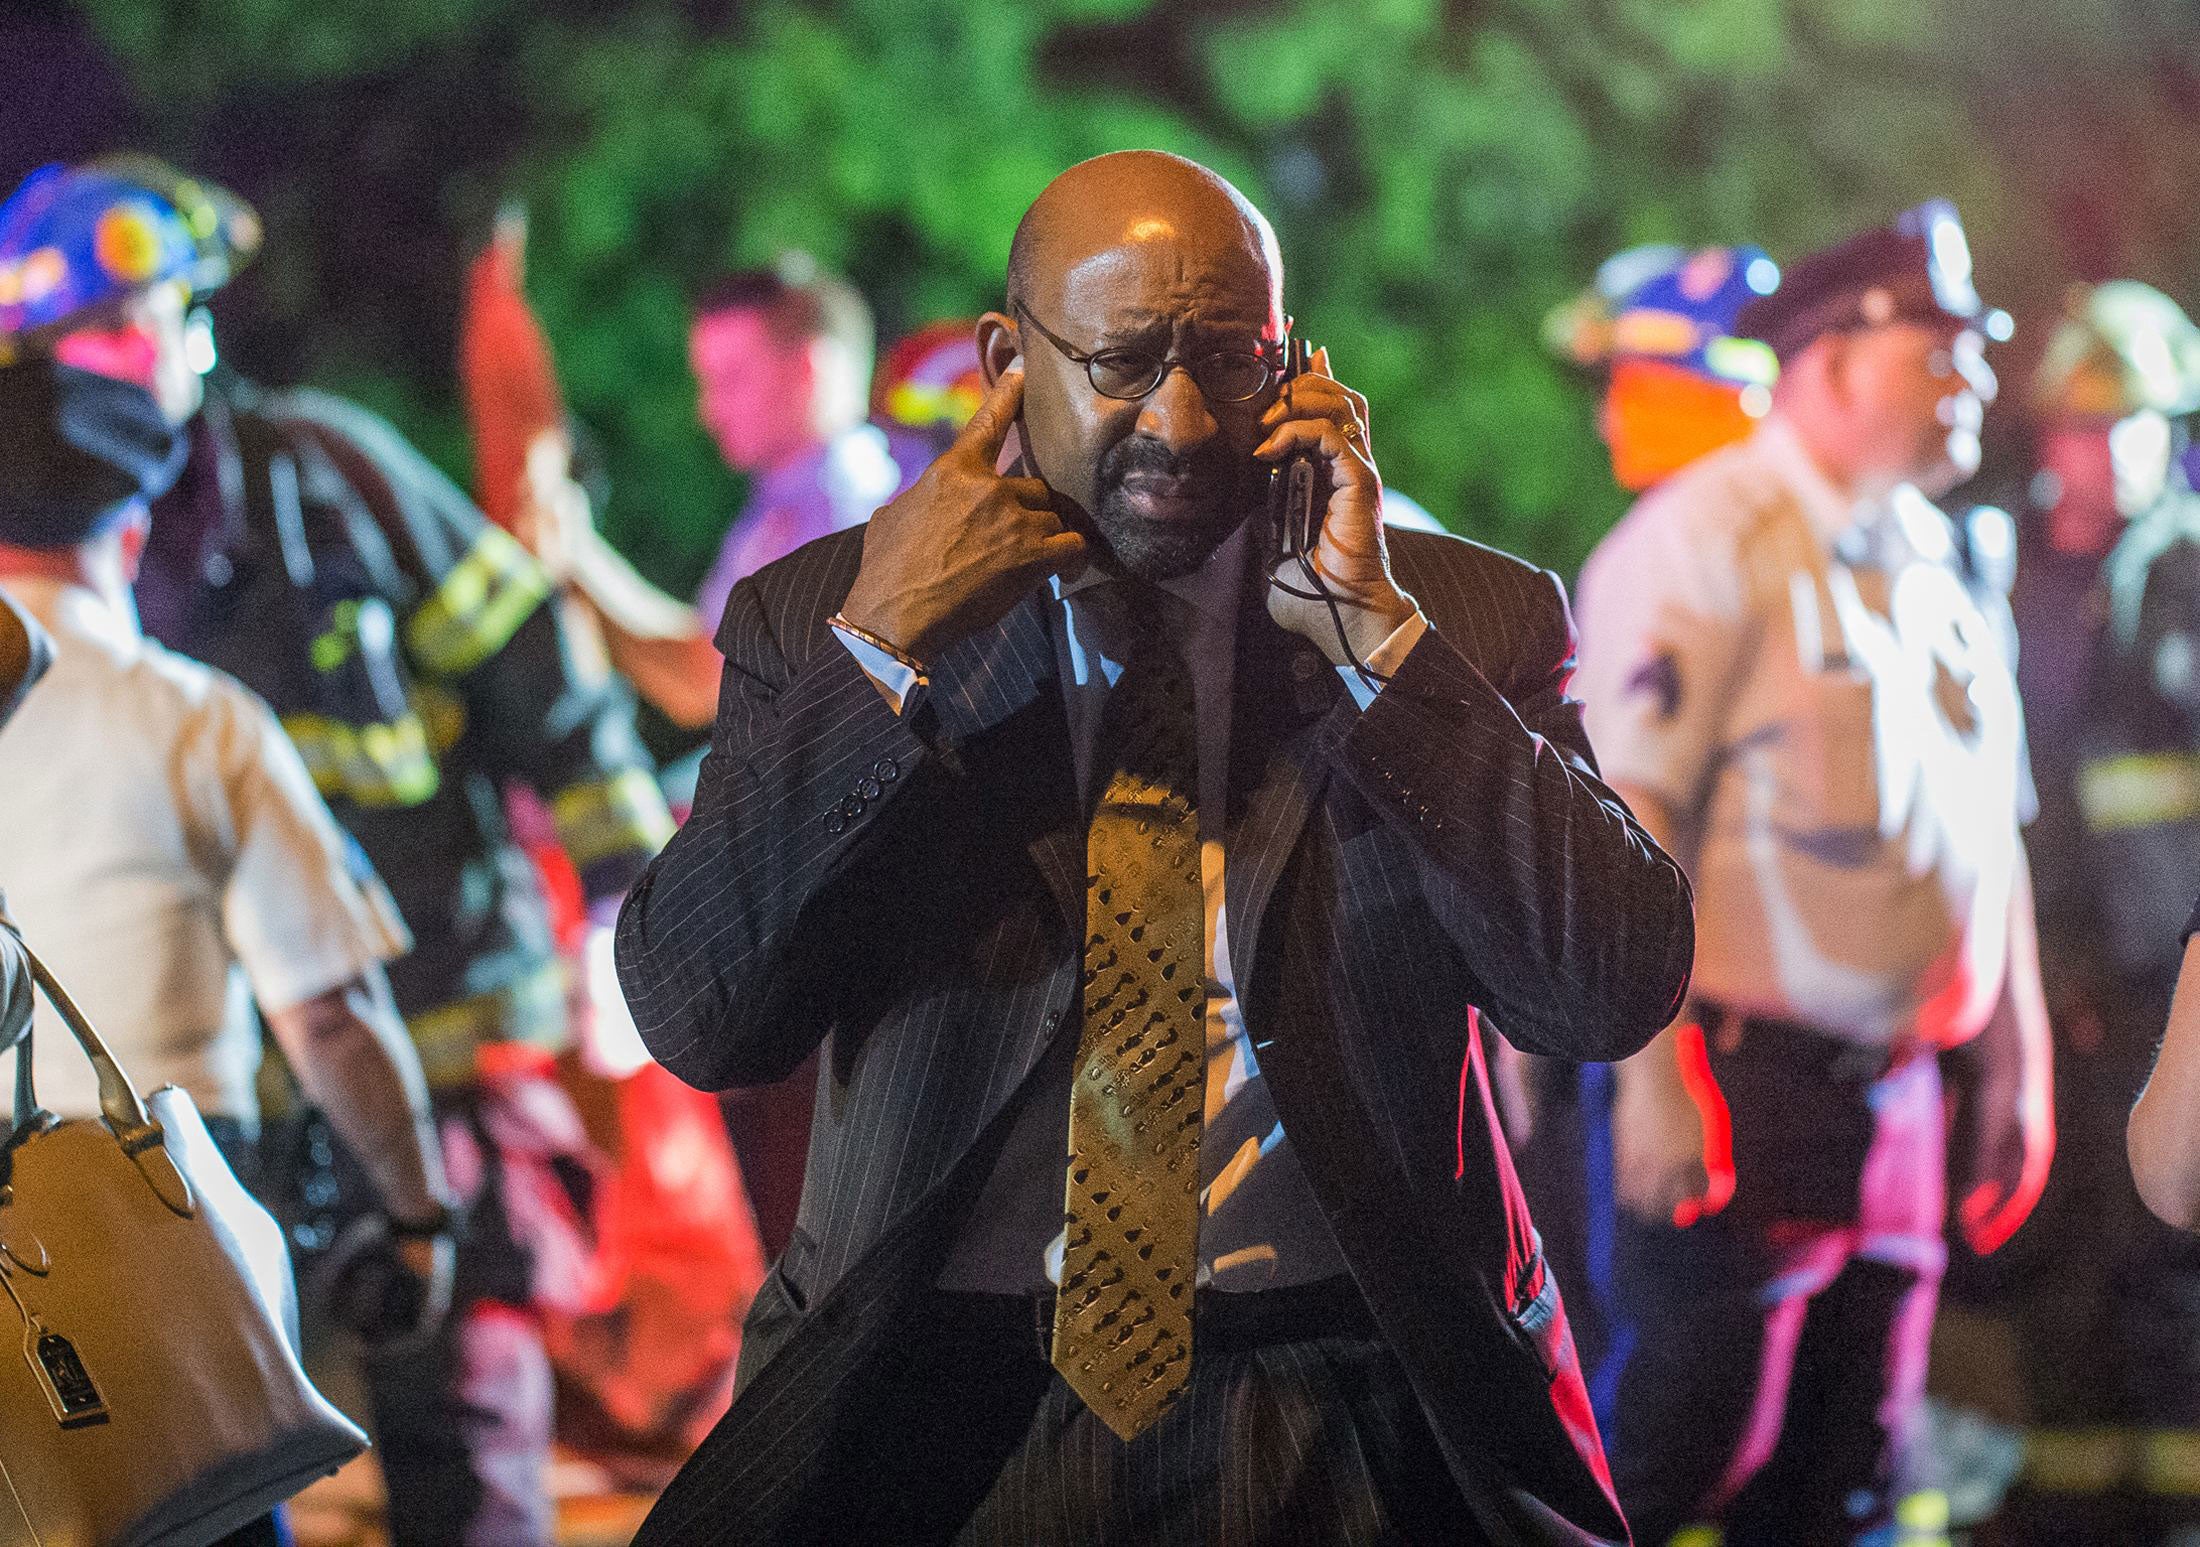 Philadelphia Mayor Michael Nutter was at the scene as teams searched for passengers following an Amtrak train crash